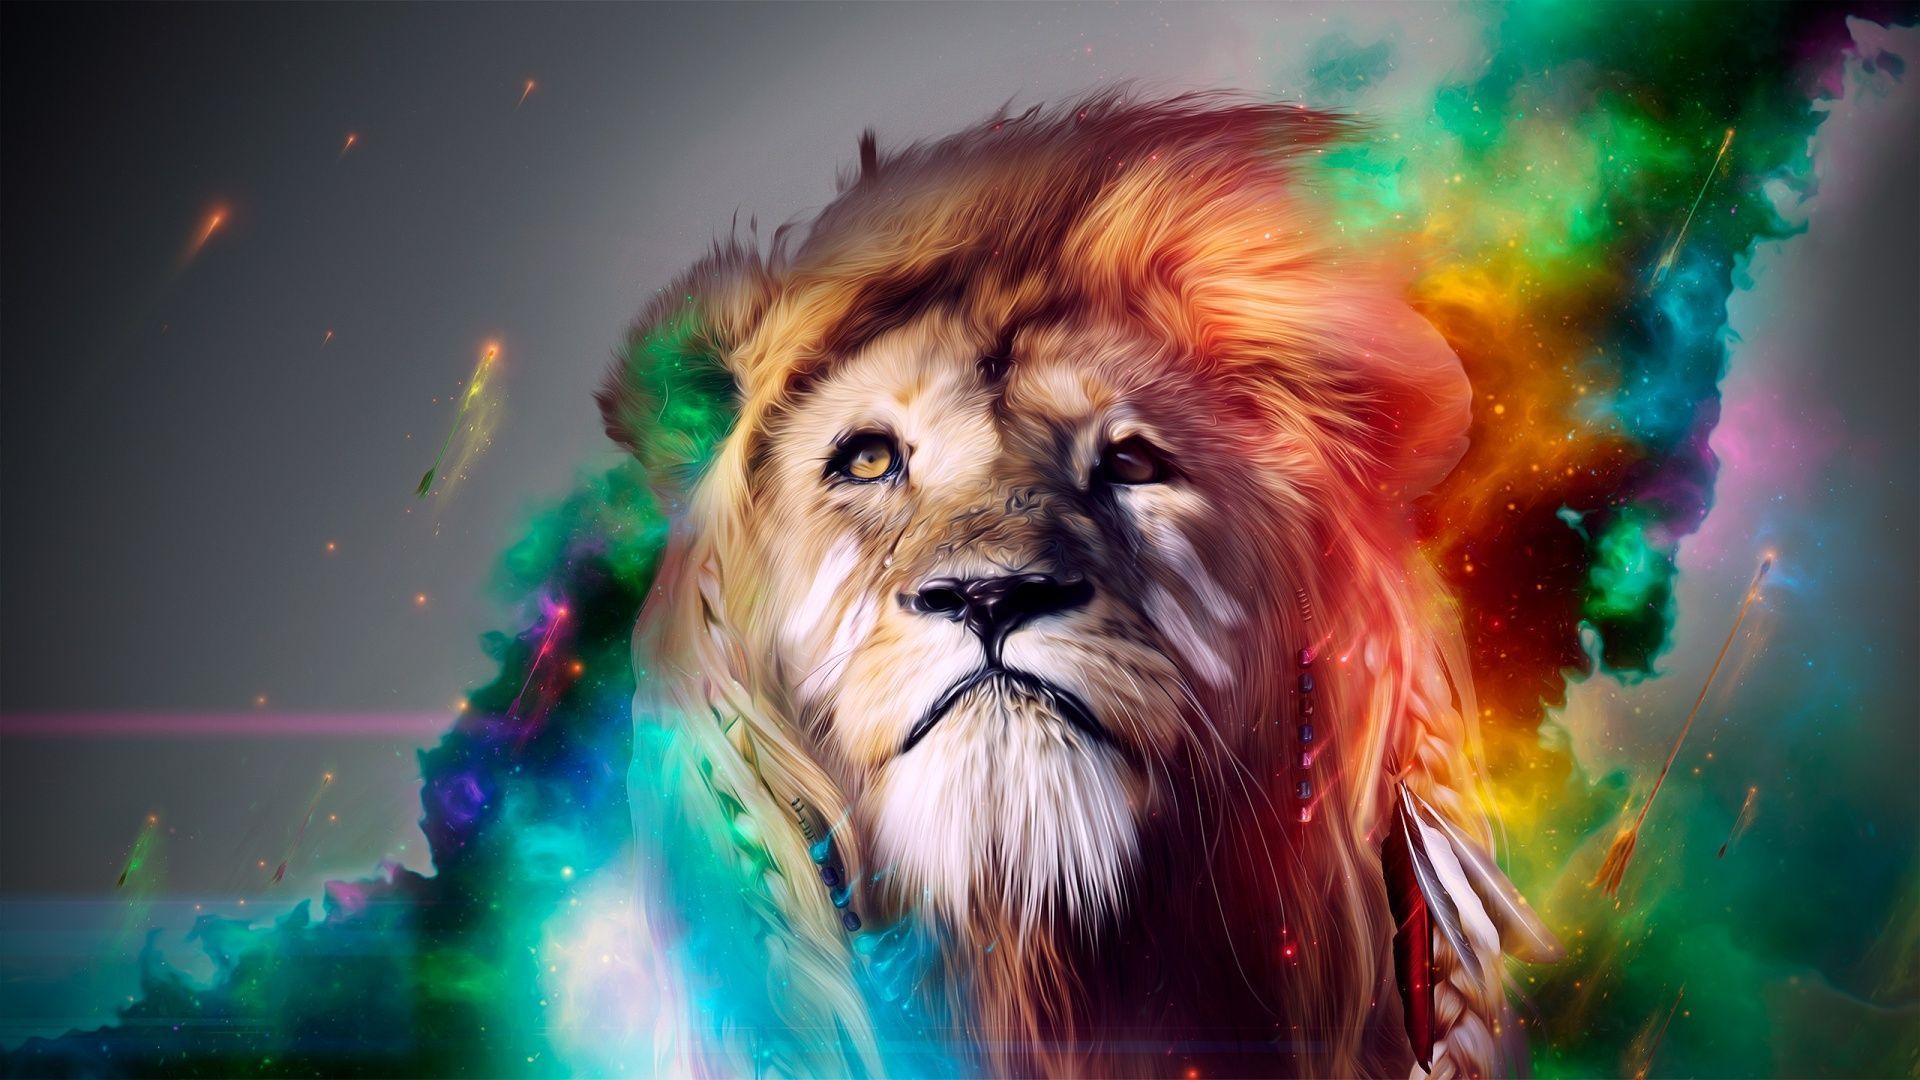 Awesome-Lion-HD-Wallpapers-1080p.jpg